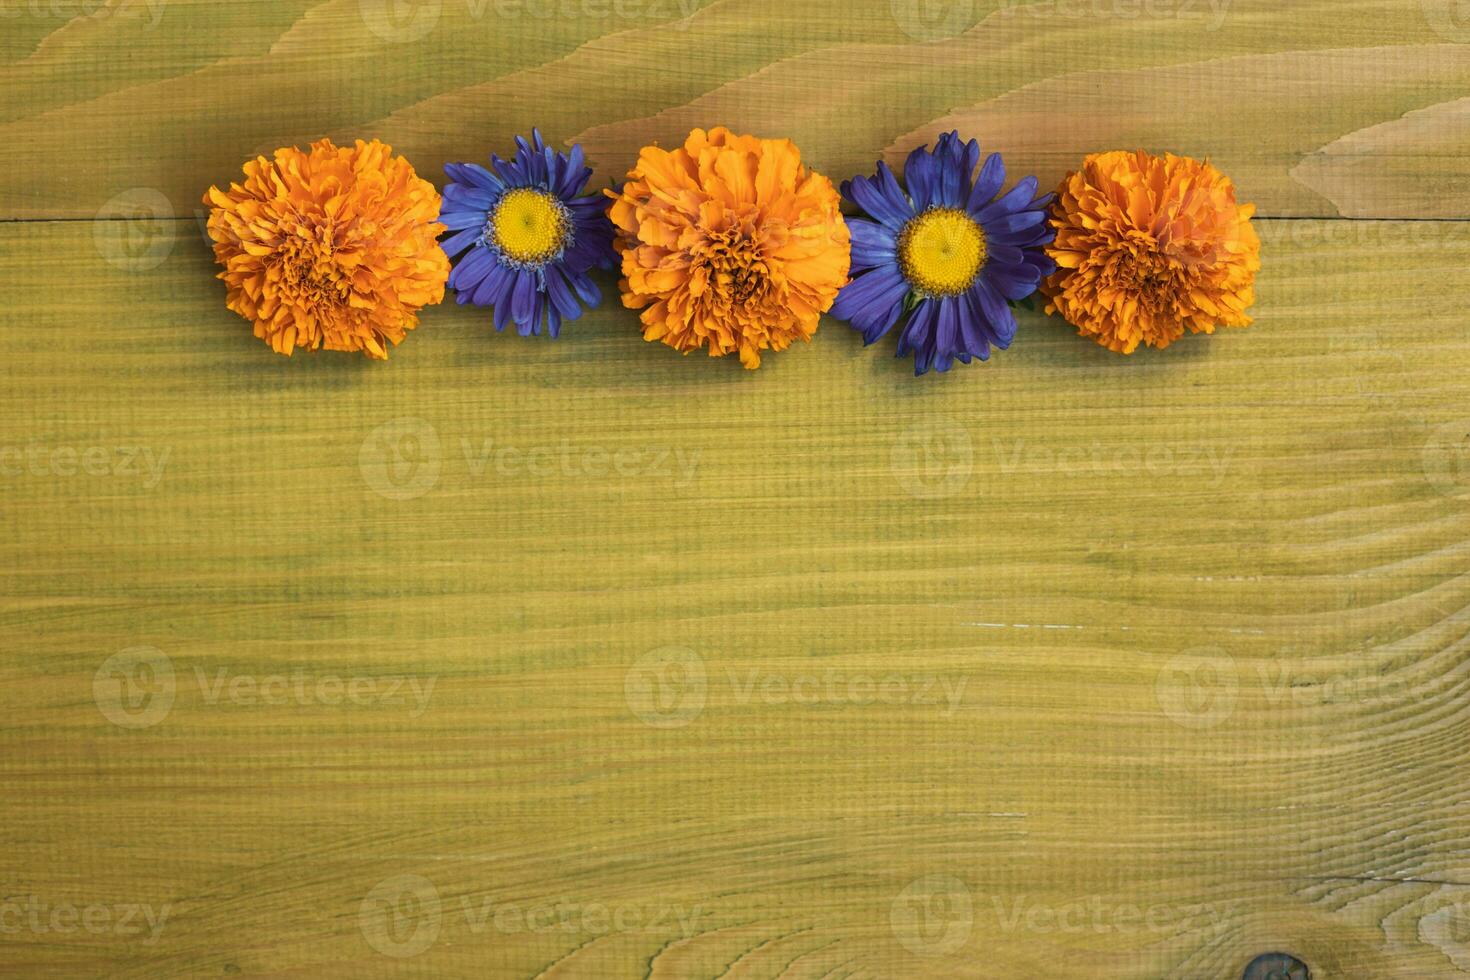 Image of beautiful flowers on wooden background. photo